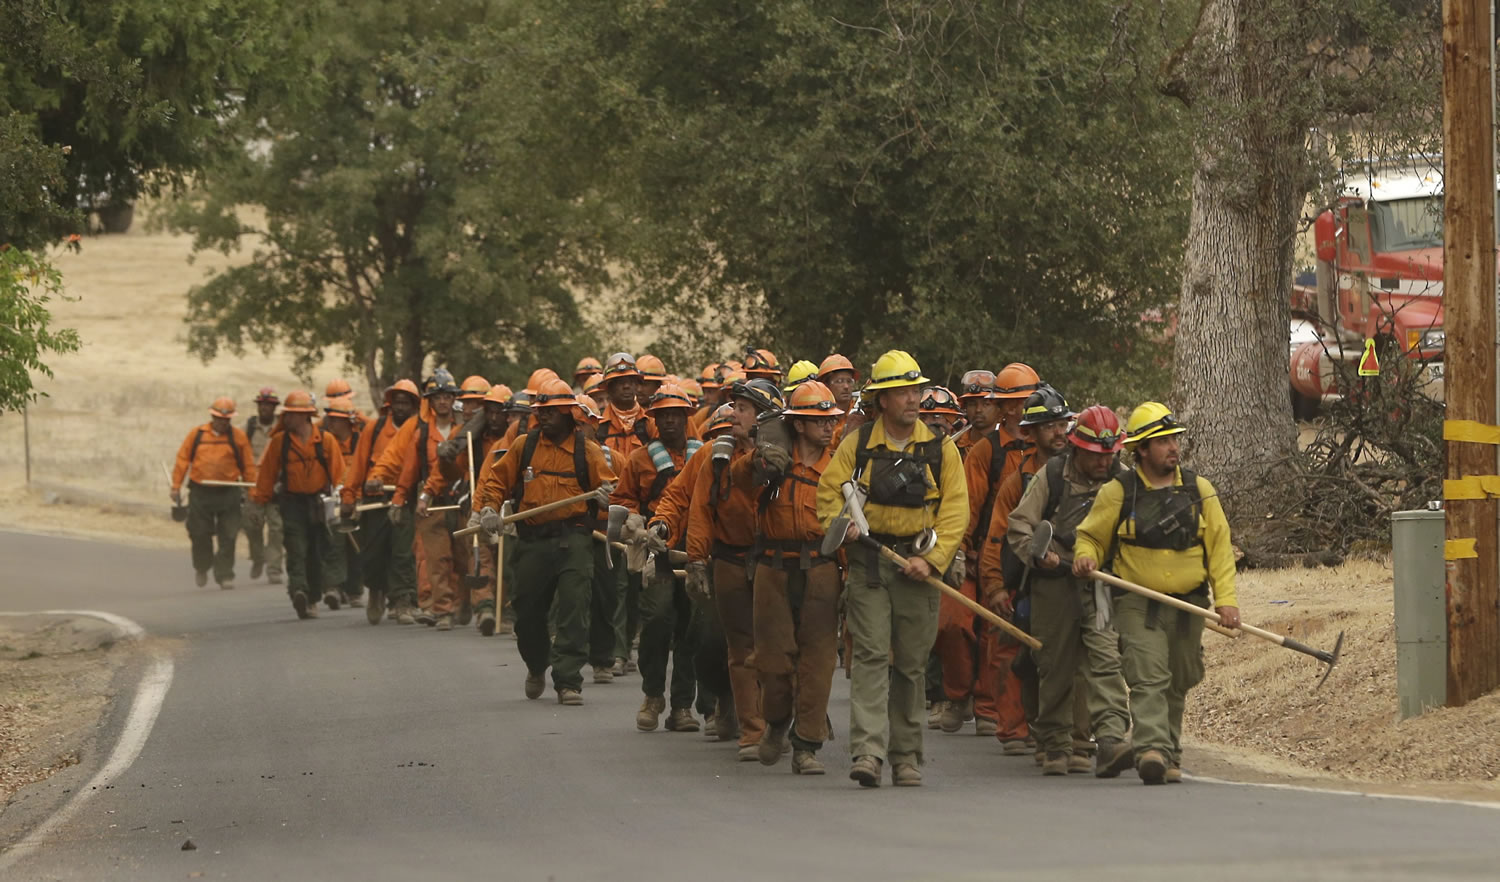 A California Department of Corrections and Rehabilitation inmate work crew walks through Sheep Ranch, Calif., on the way to battle a fire Sunday. Two of California's fastest-burning wildfires in decades overtook several Northern California towns, destroying homes and sending residents fleeing.